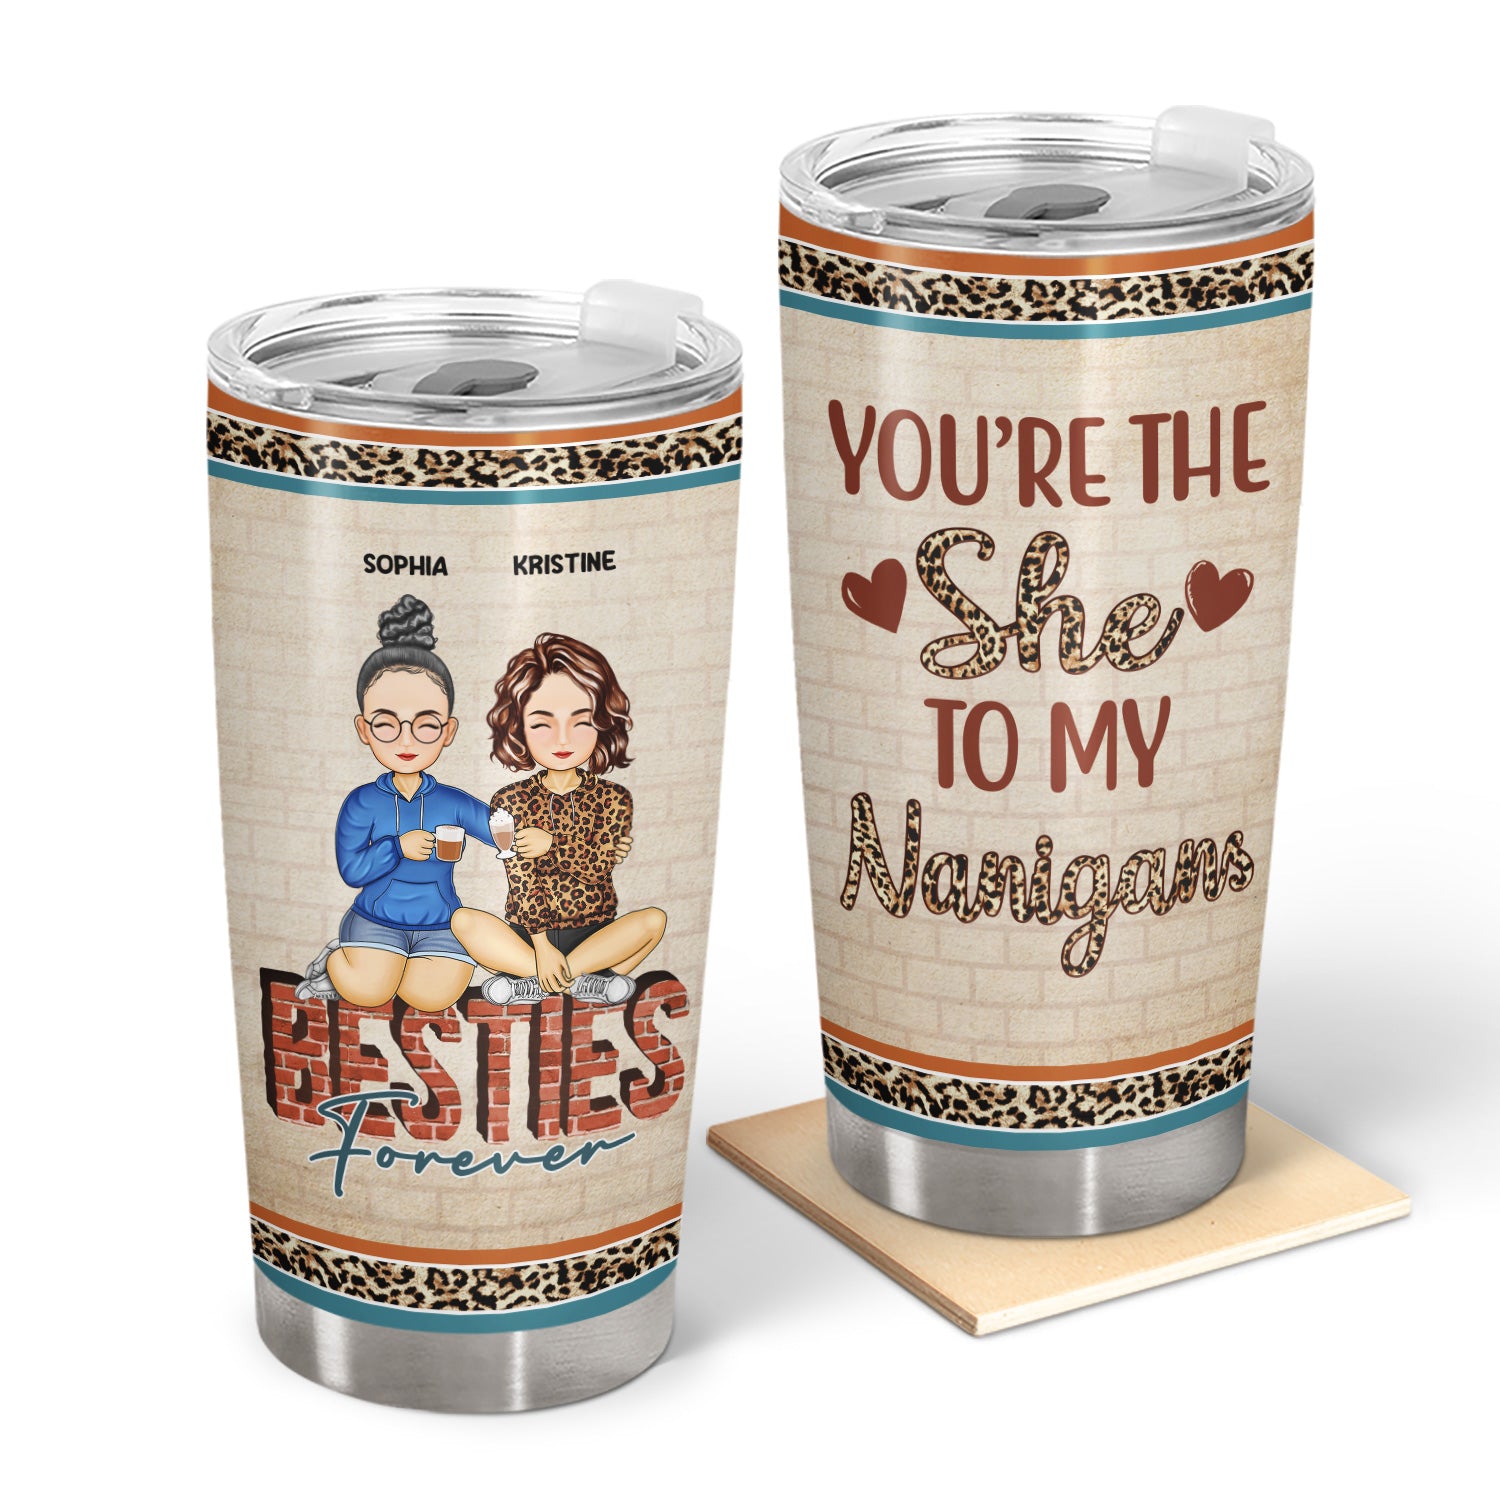 Besties You’re The She To My Nanigans - Birthday Gift For Best Friends, Sisters, Colleagues - Personalized Custom Tumbler